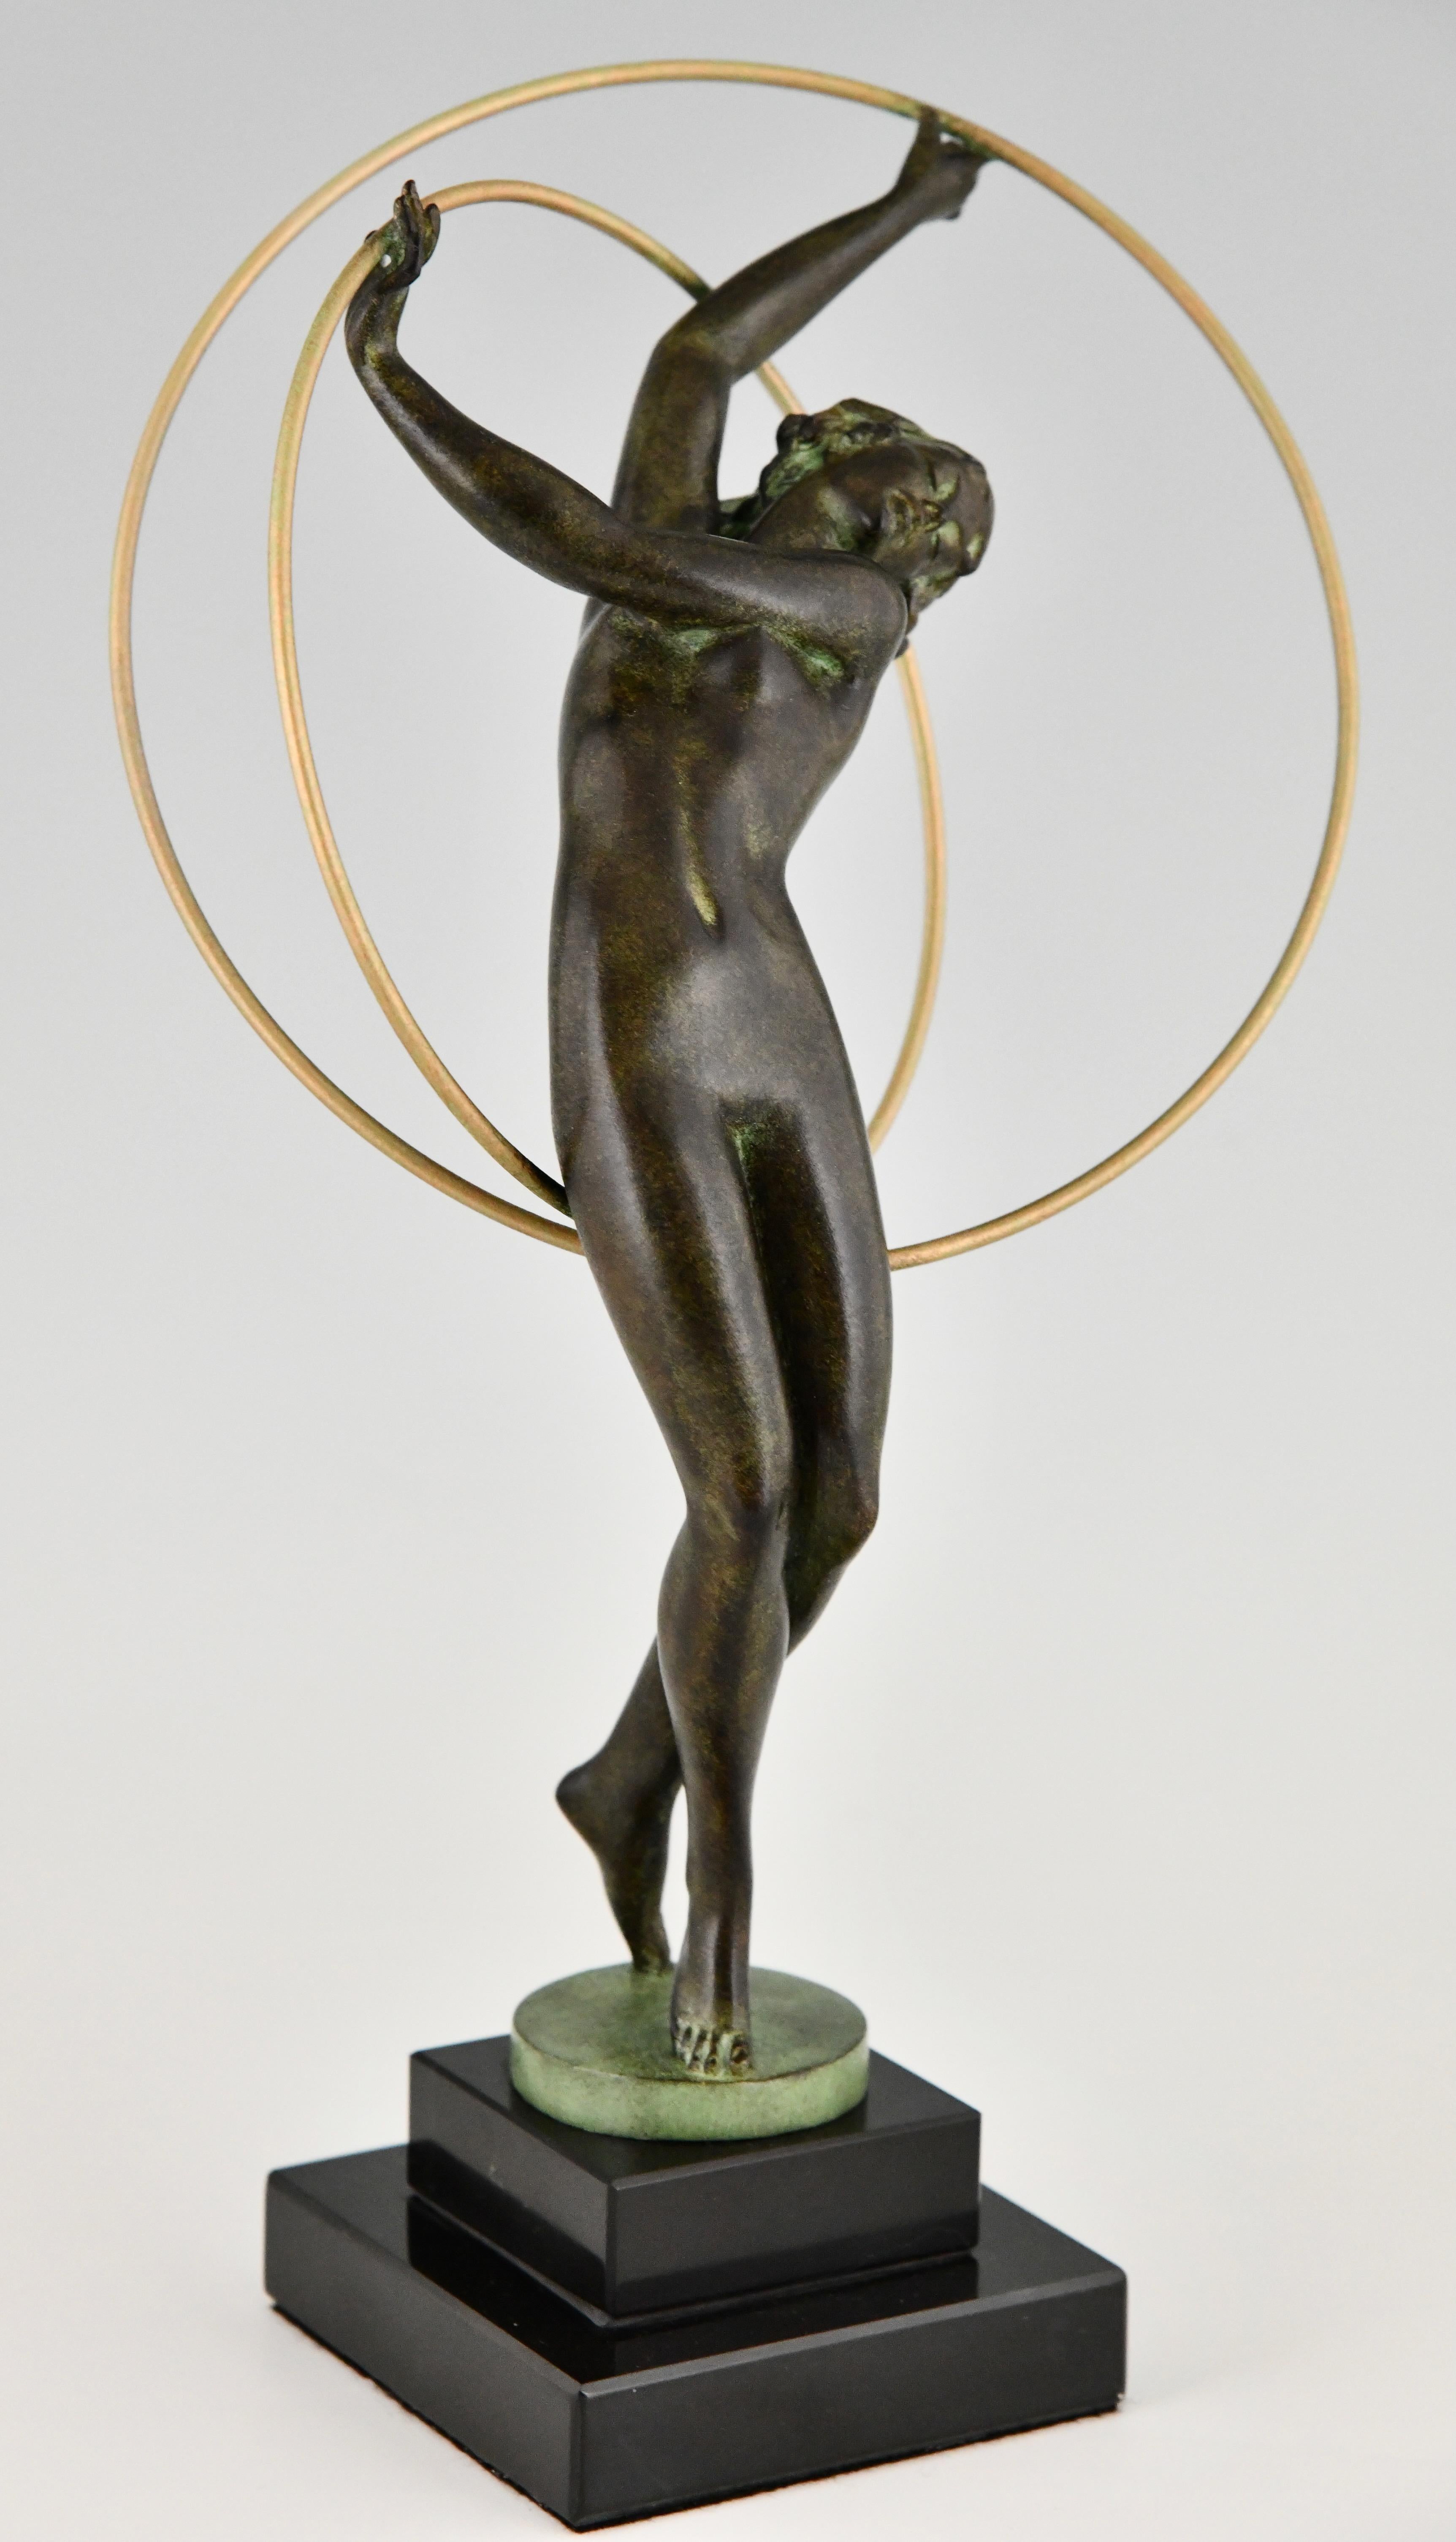 Art Deco style sculpture dancer Illusion signed by Fayral, pseudonym of Pierre Le Faguays.
Patinated Art Metal on a Black marble base. 
With the Le Verrier foundry mark. 
Design 1930.
Posthumous contemporary cast of the Le Verrier foundry. 
With